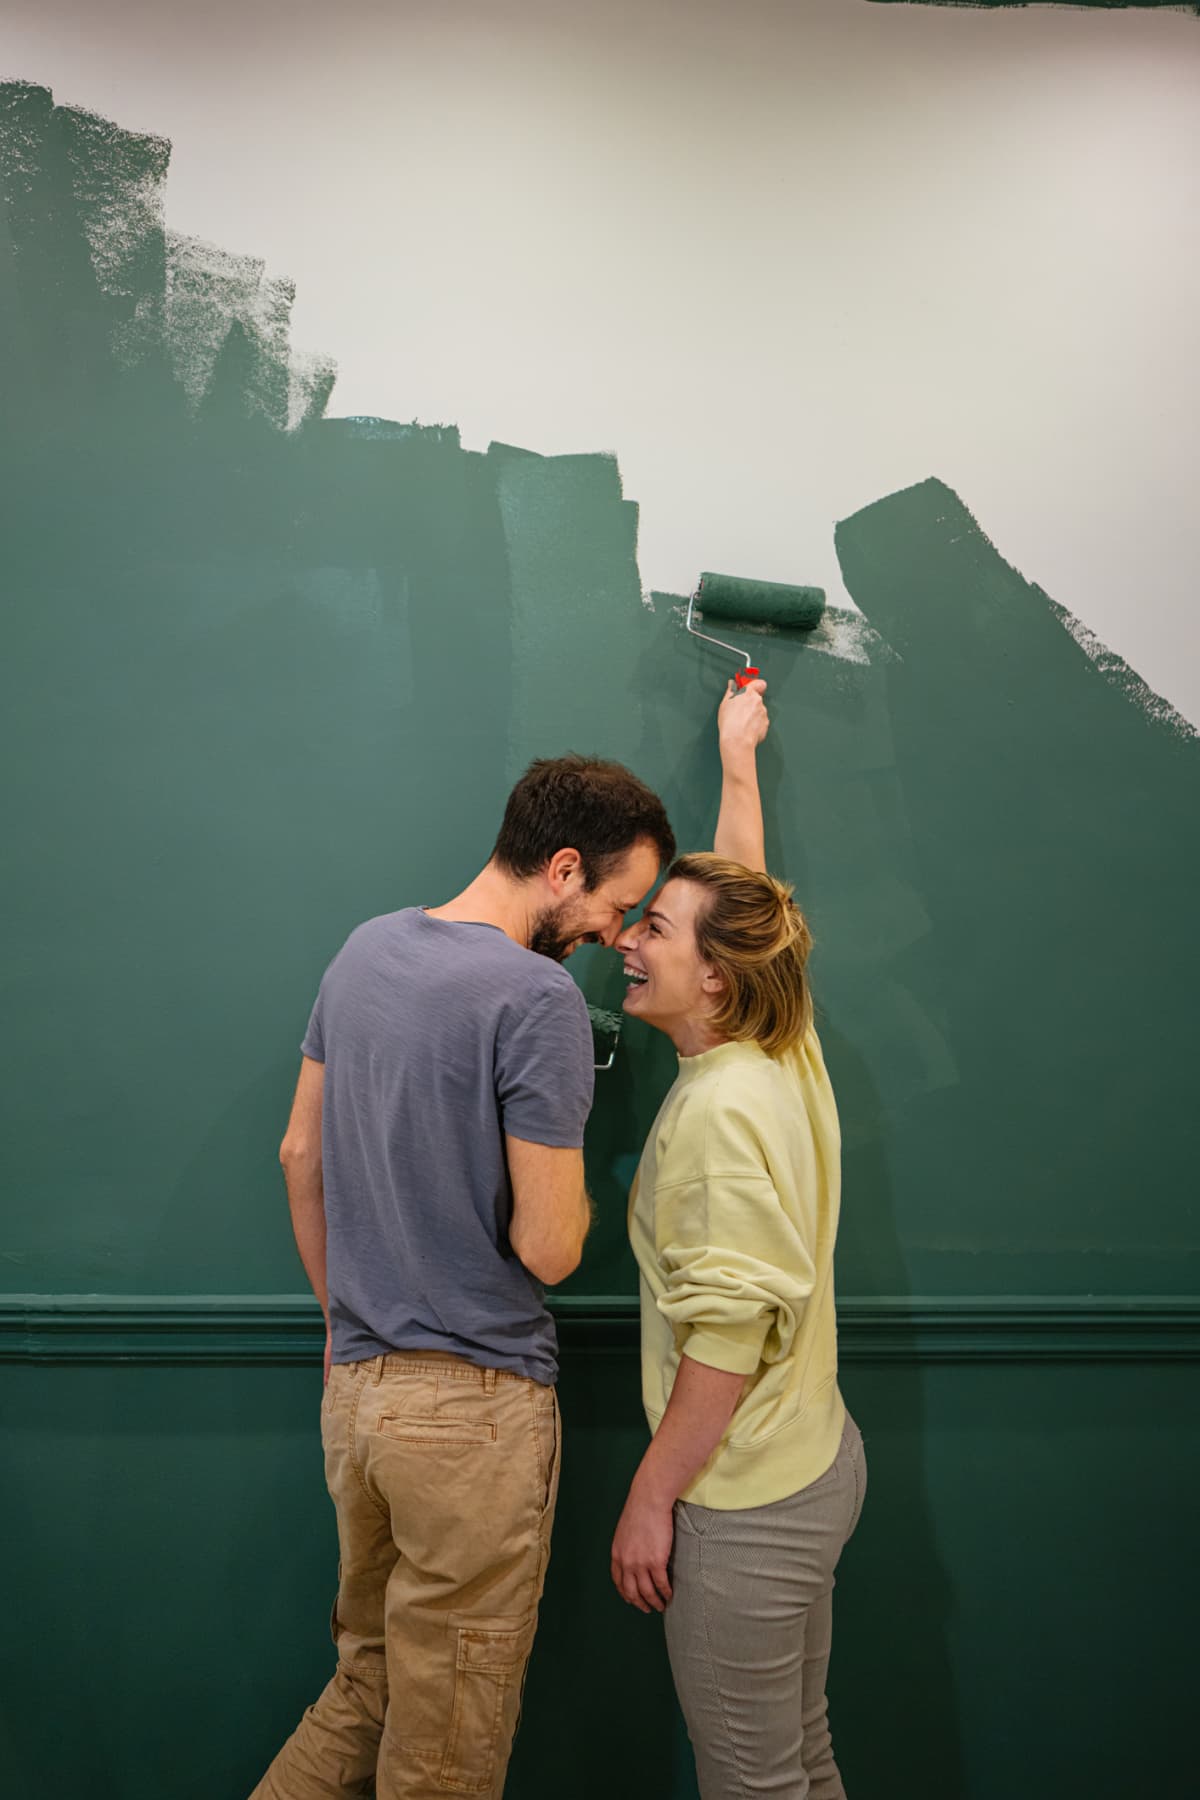 A young couple painting the walls